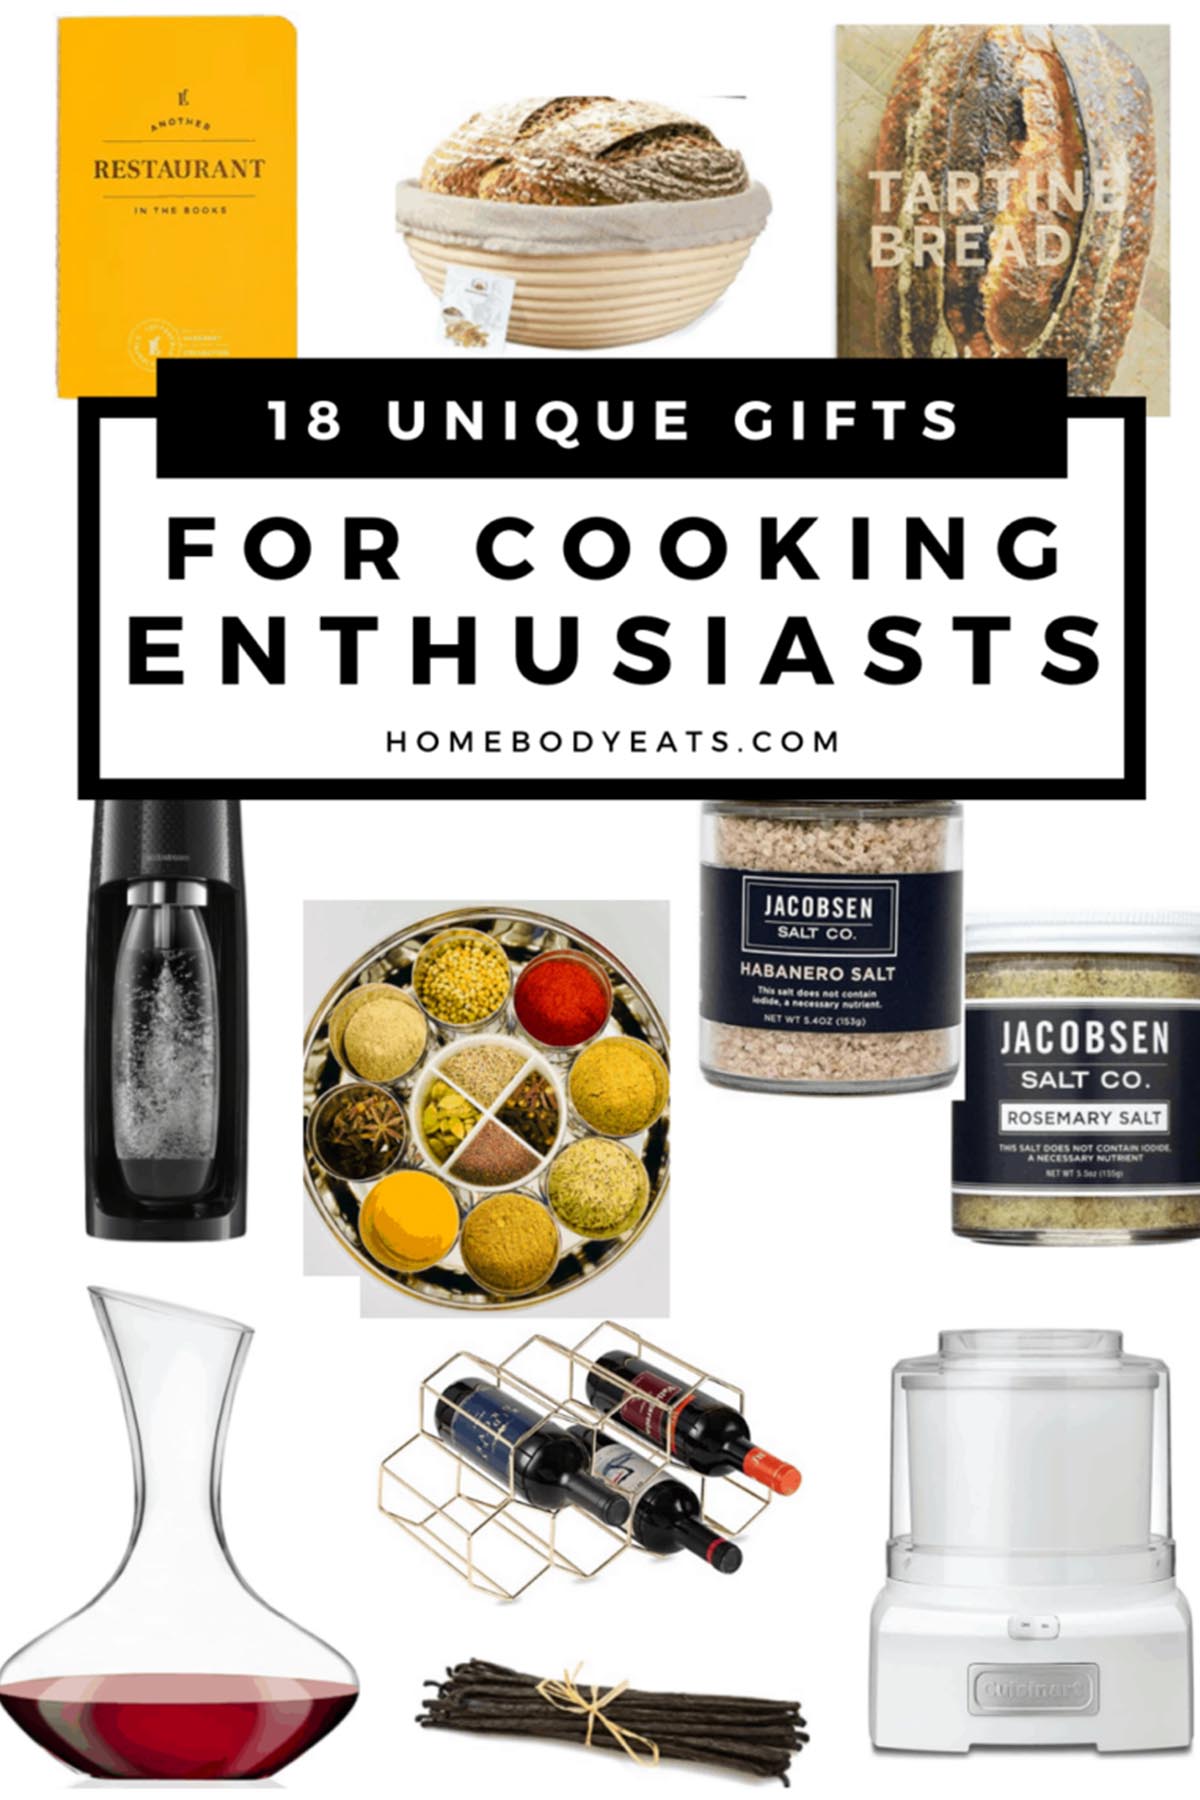 18 unique gifts for cooking enthusiasts